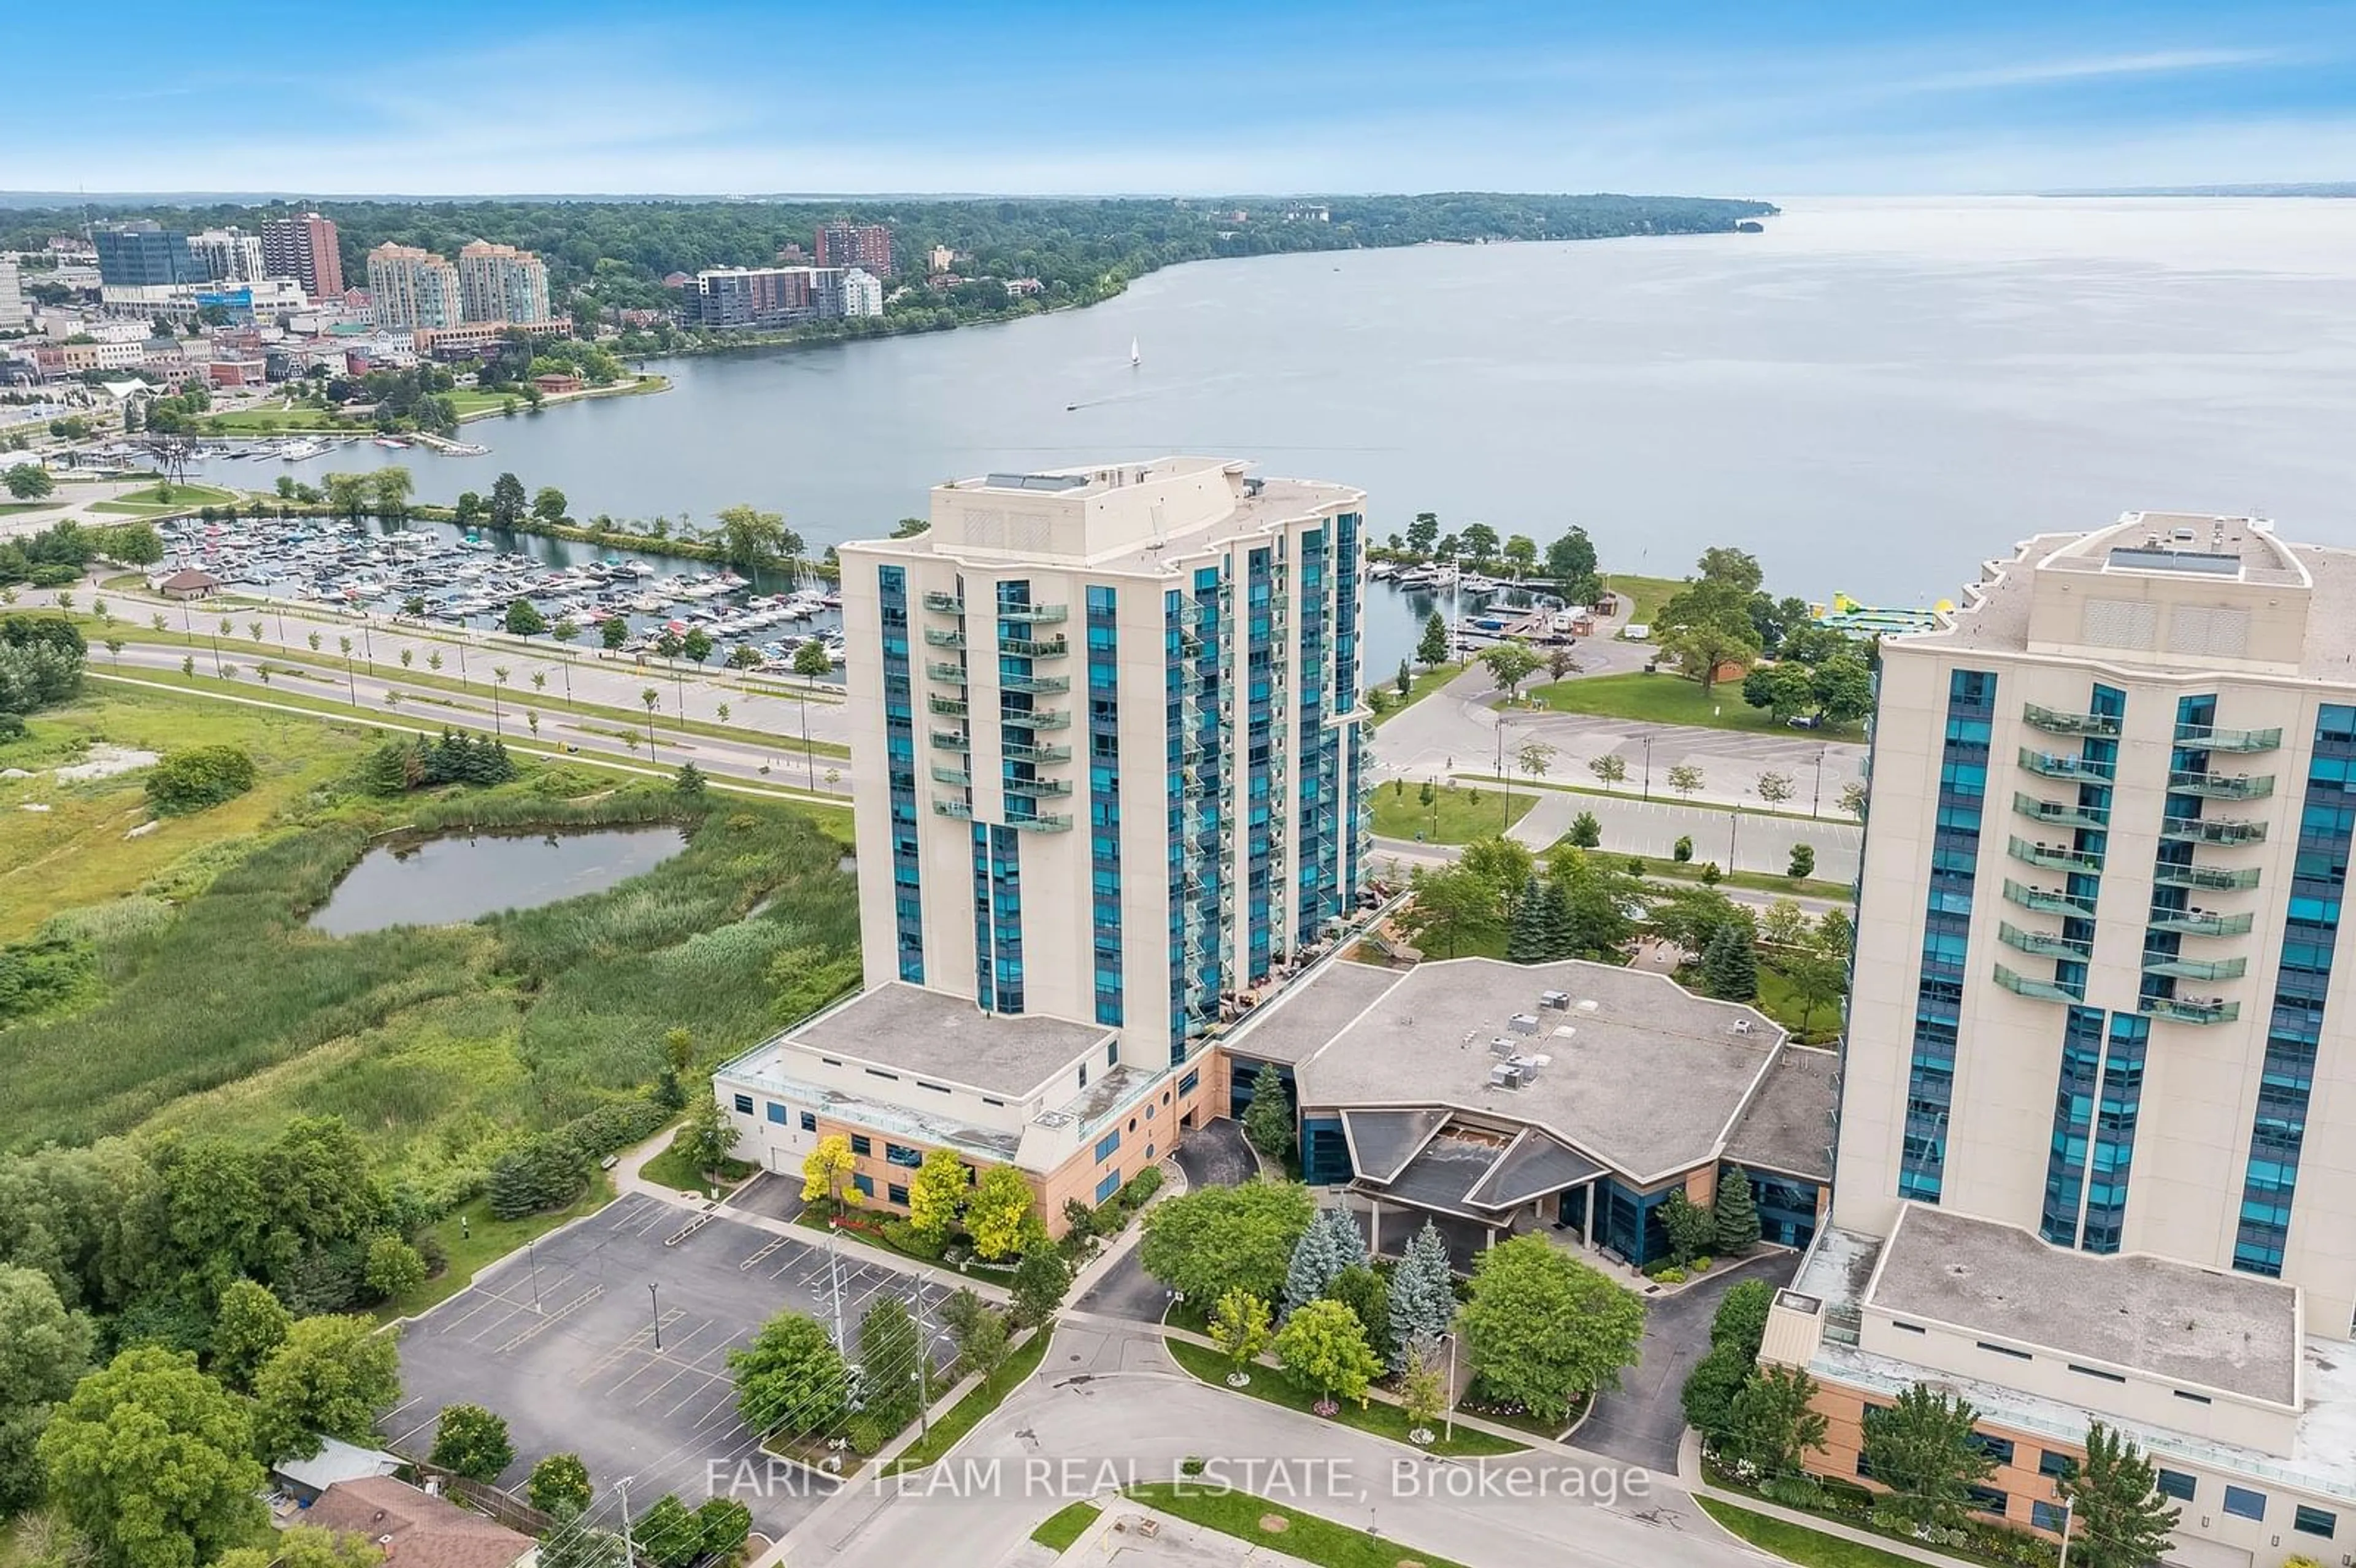 Lakeview for 33 Ellen St #707, Barrie Ontario L4N 6G2